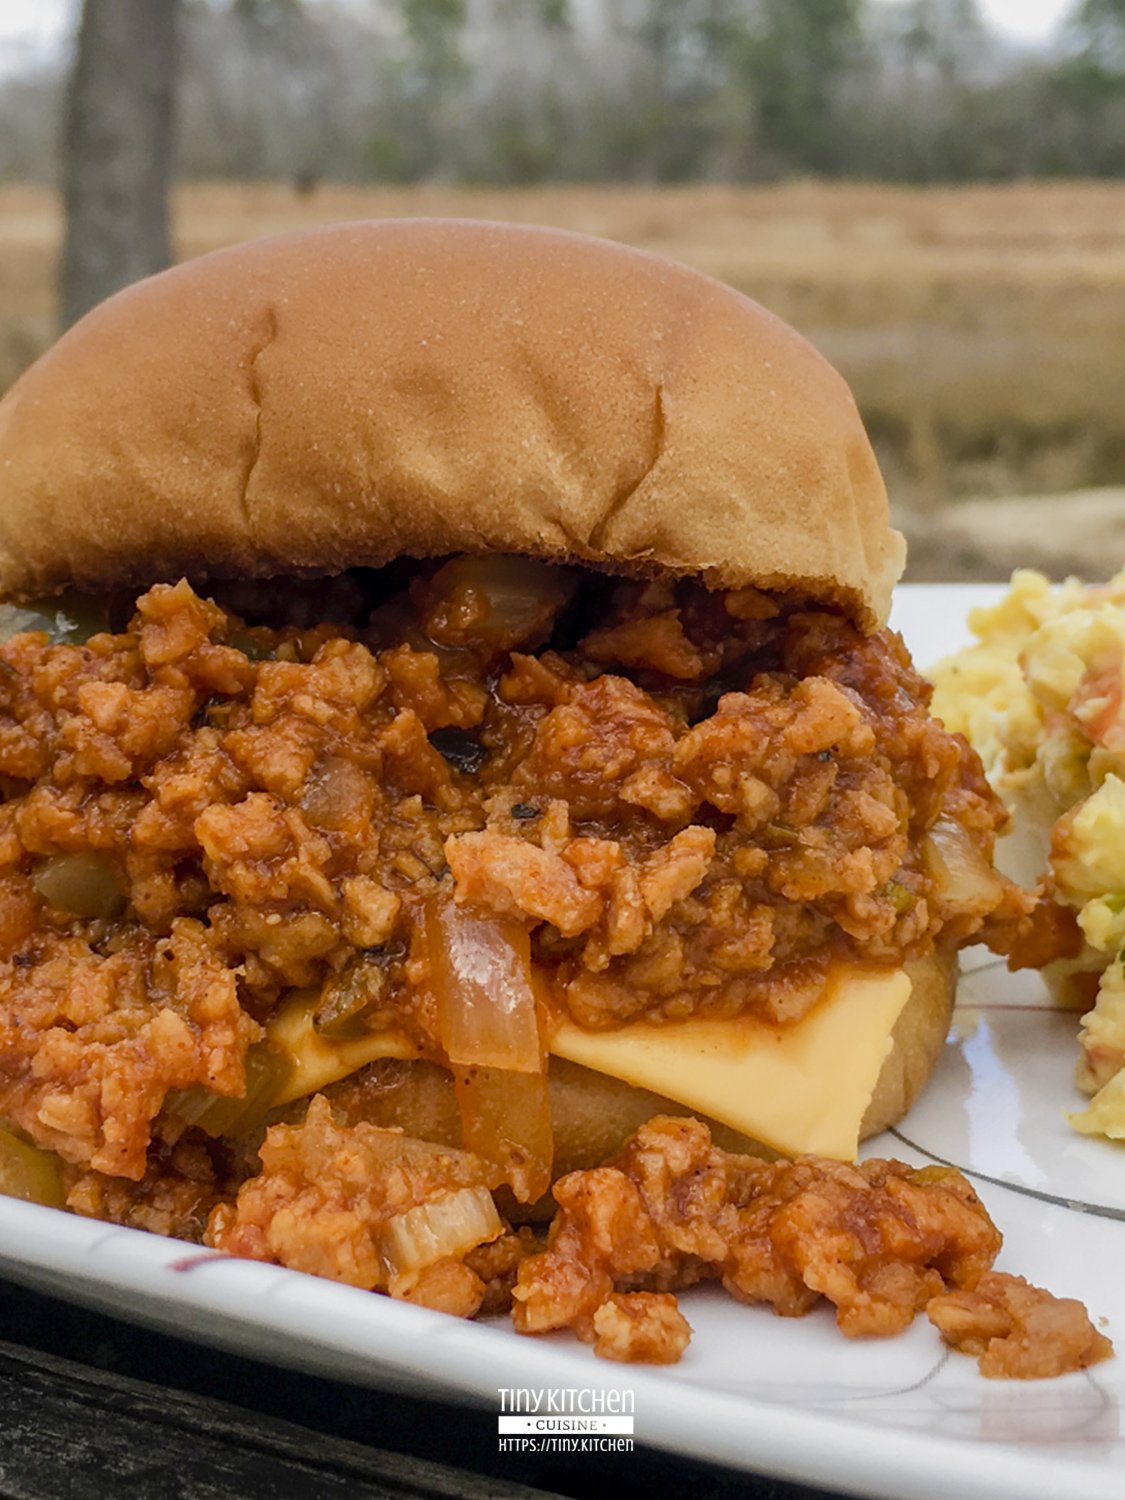 My recipe for vegetarian sloppy joes uses TVP (textured vegetable protein) mixed with a thick and tangy tomato sauce to make this spin on a classic sandwich. Delicious and healthy! It's so flavorful that even avid meat-eaters won't notice there's no meat! | Tiny Kitchen Cuisine | https://tiny.kitchen/